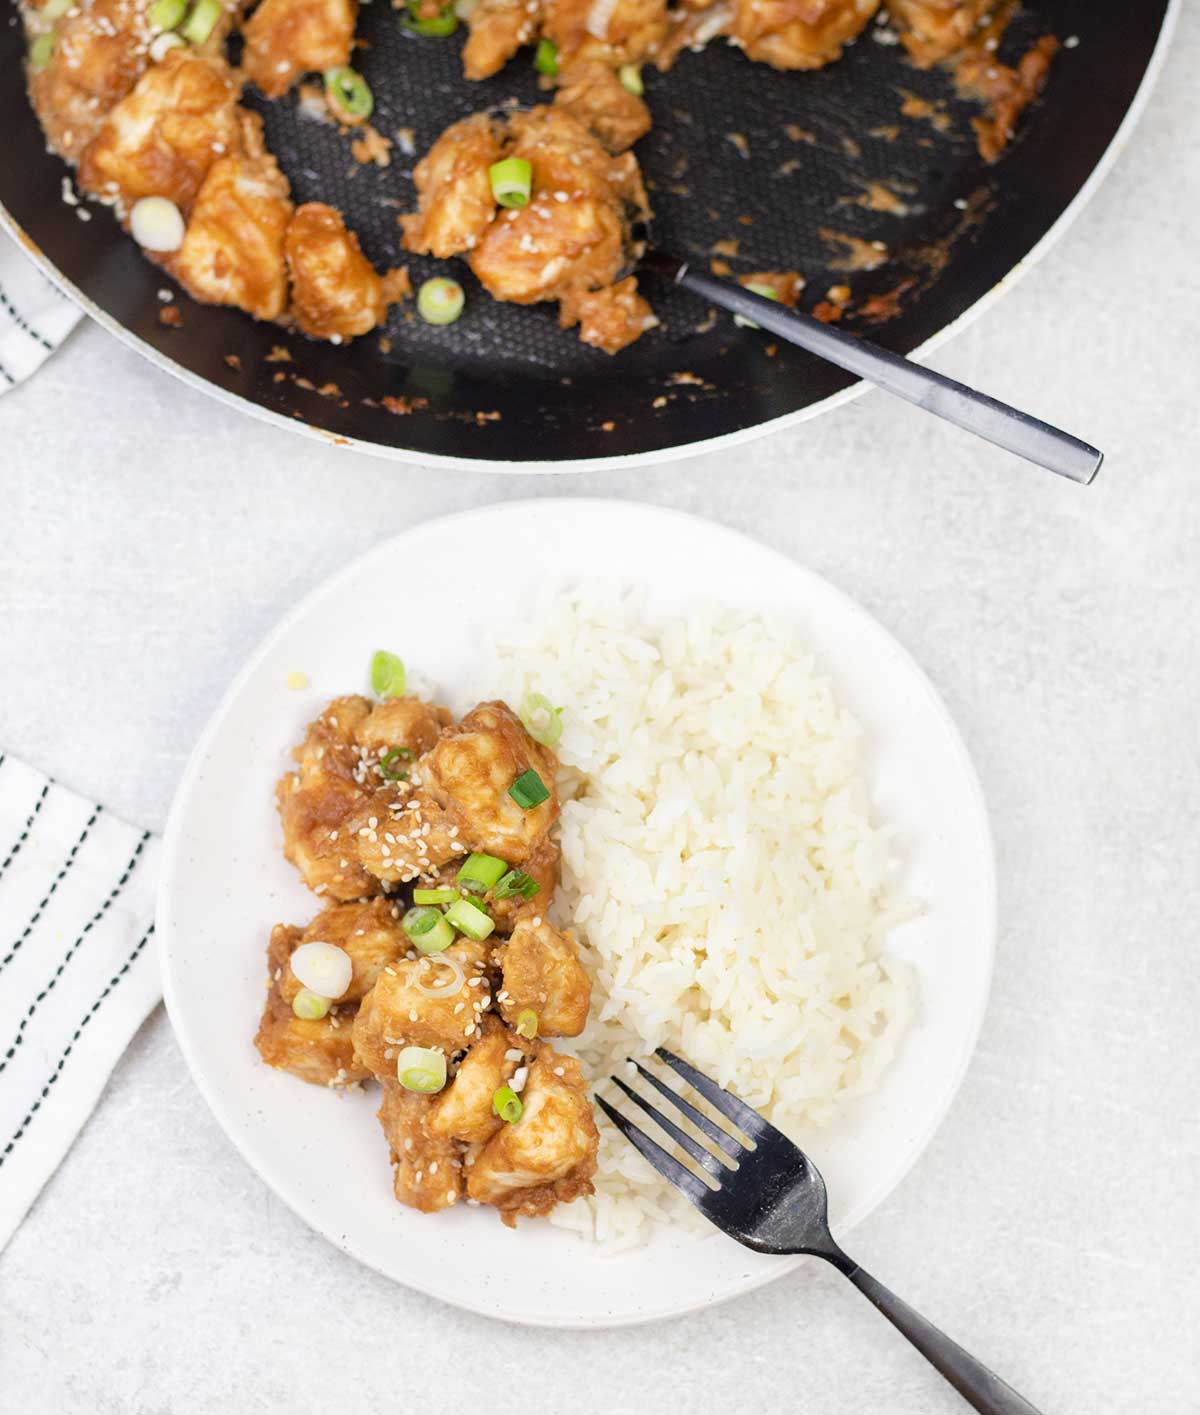 Peanut butter chicken and rice in a plate.